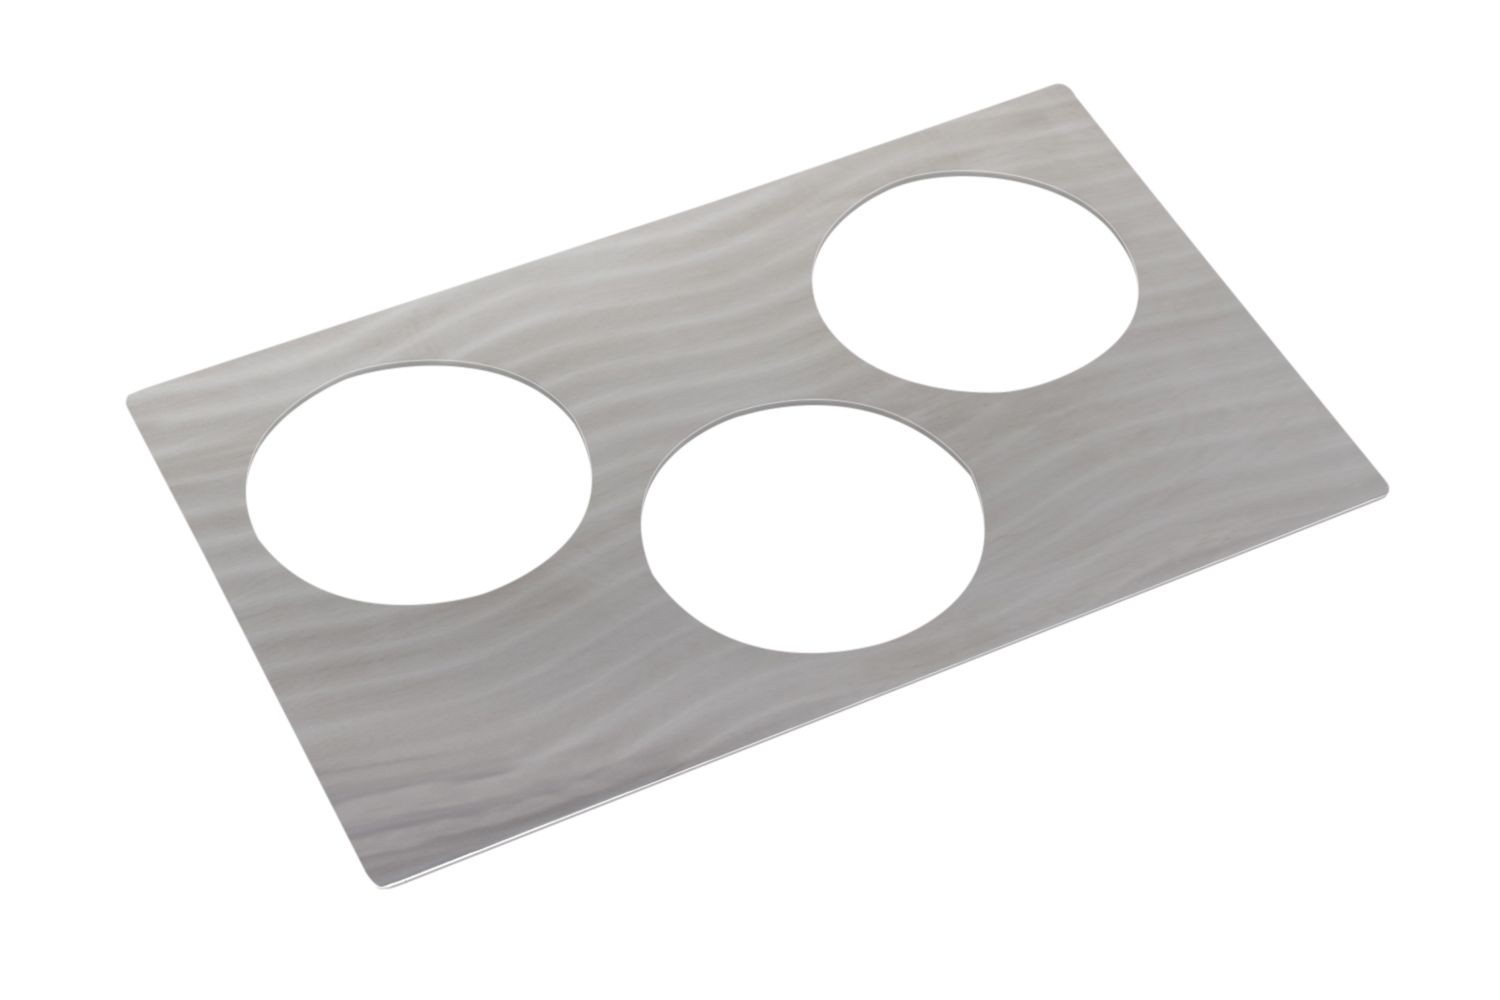 Bon Chef 52105362299 EZ Fit Stainless Steel Full Size Tile Inset with Swirls for (3) 62299NC, 12 3/4" x 20 13/16"